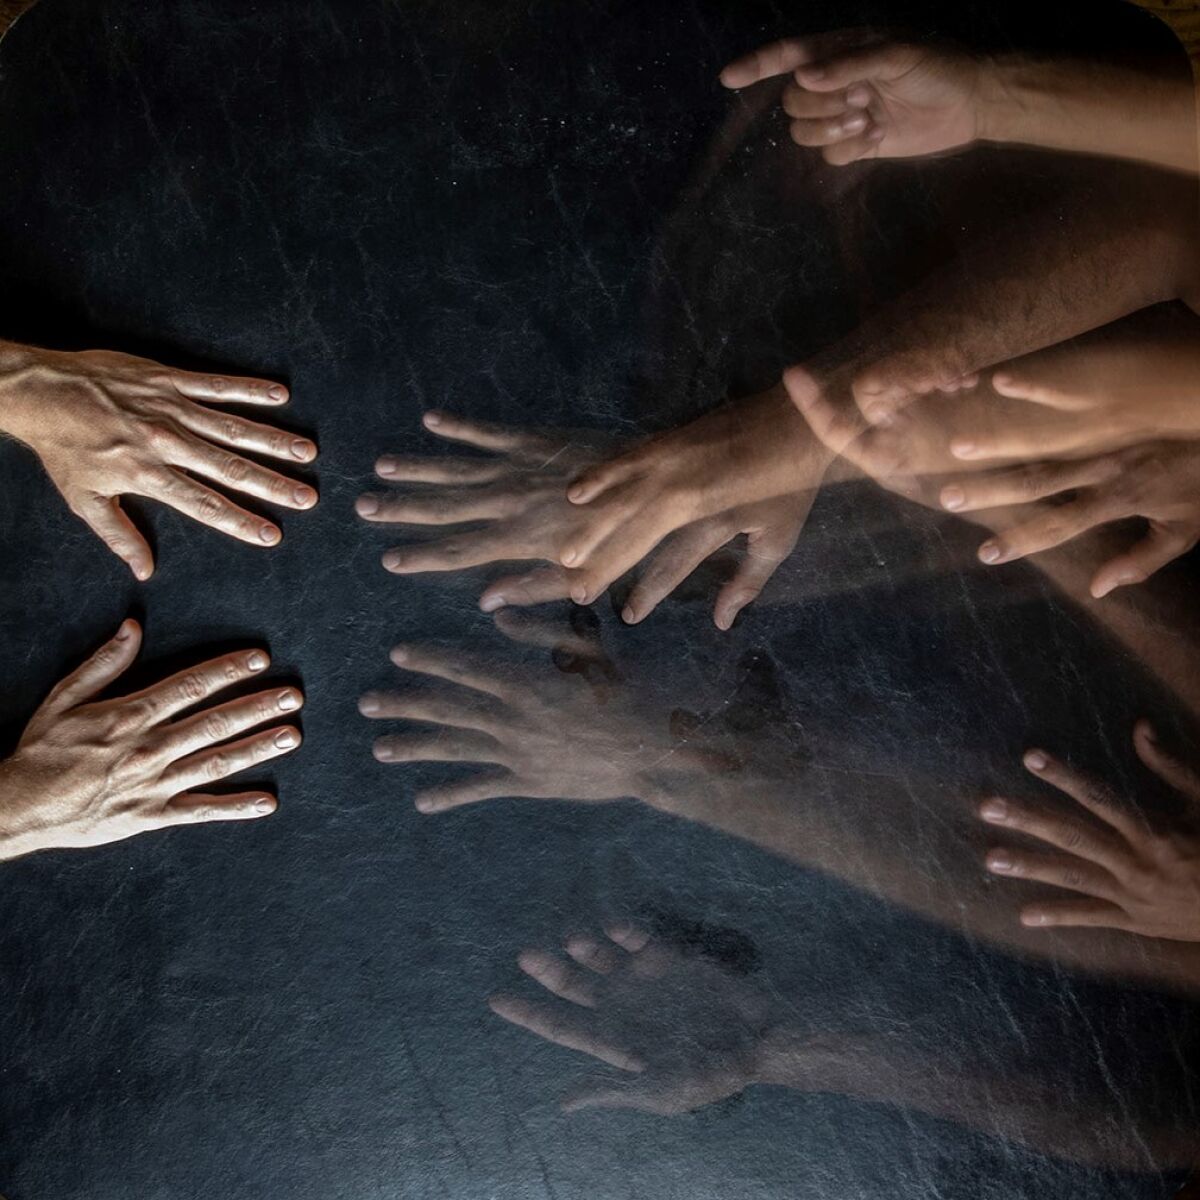 A promotional image for La Jolla Playhouse's "A Thousand Ways"